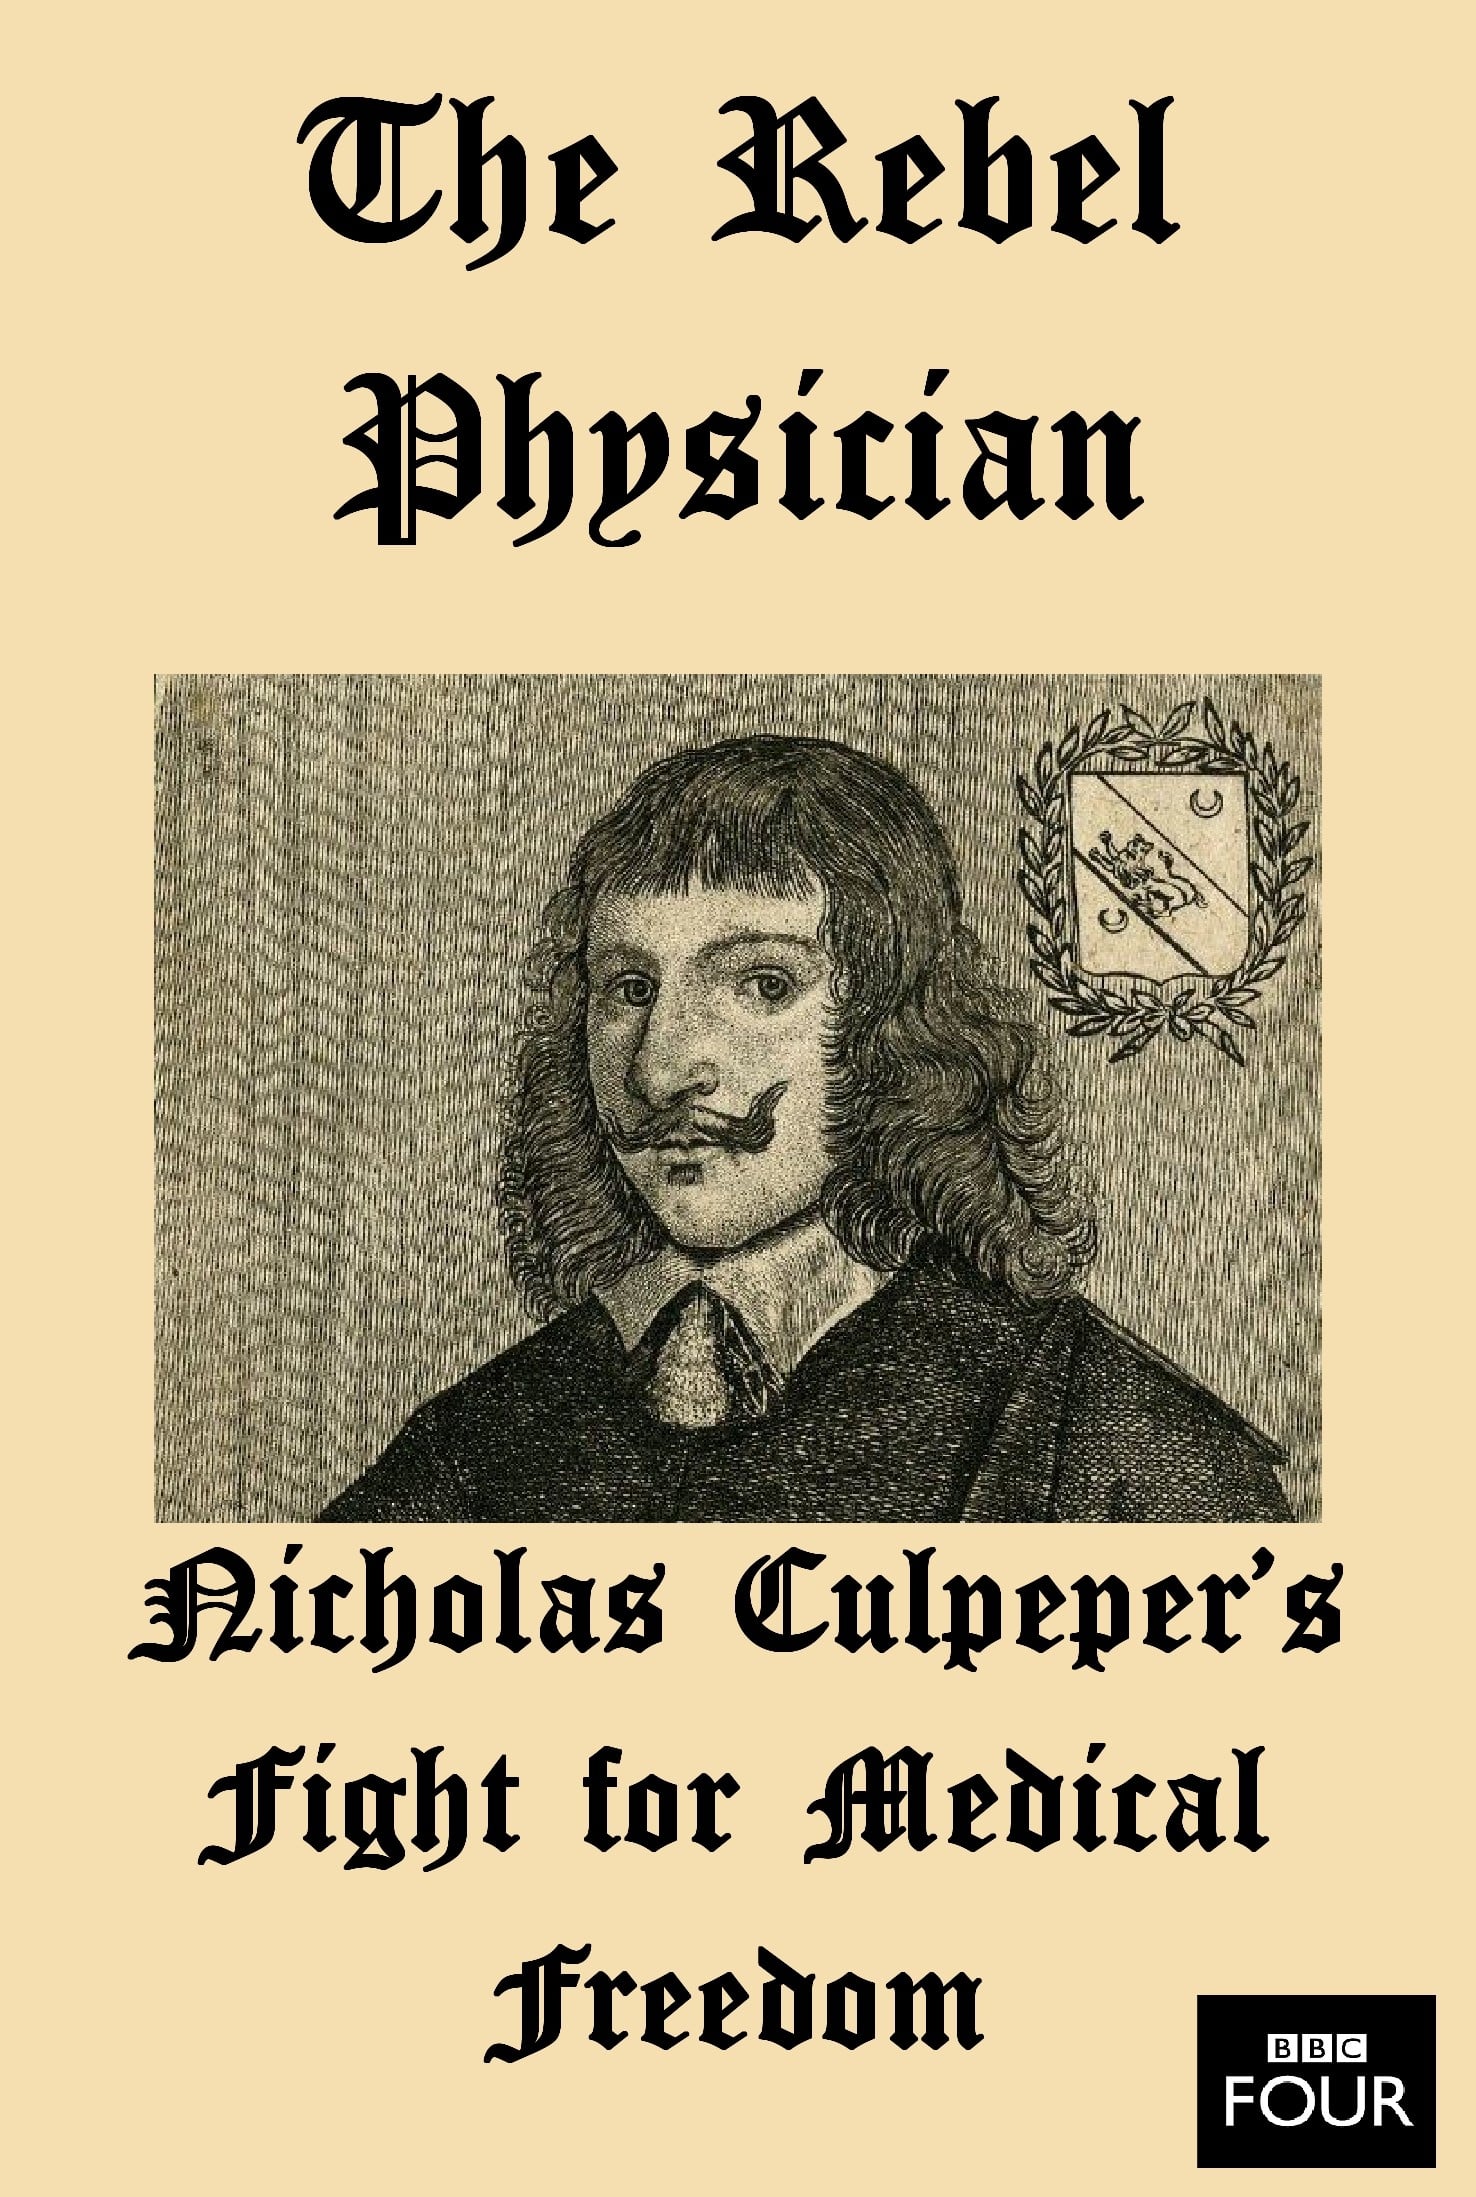 The Rebel Physician: Nicholas Culpeper's Fight For Medical Freedom